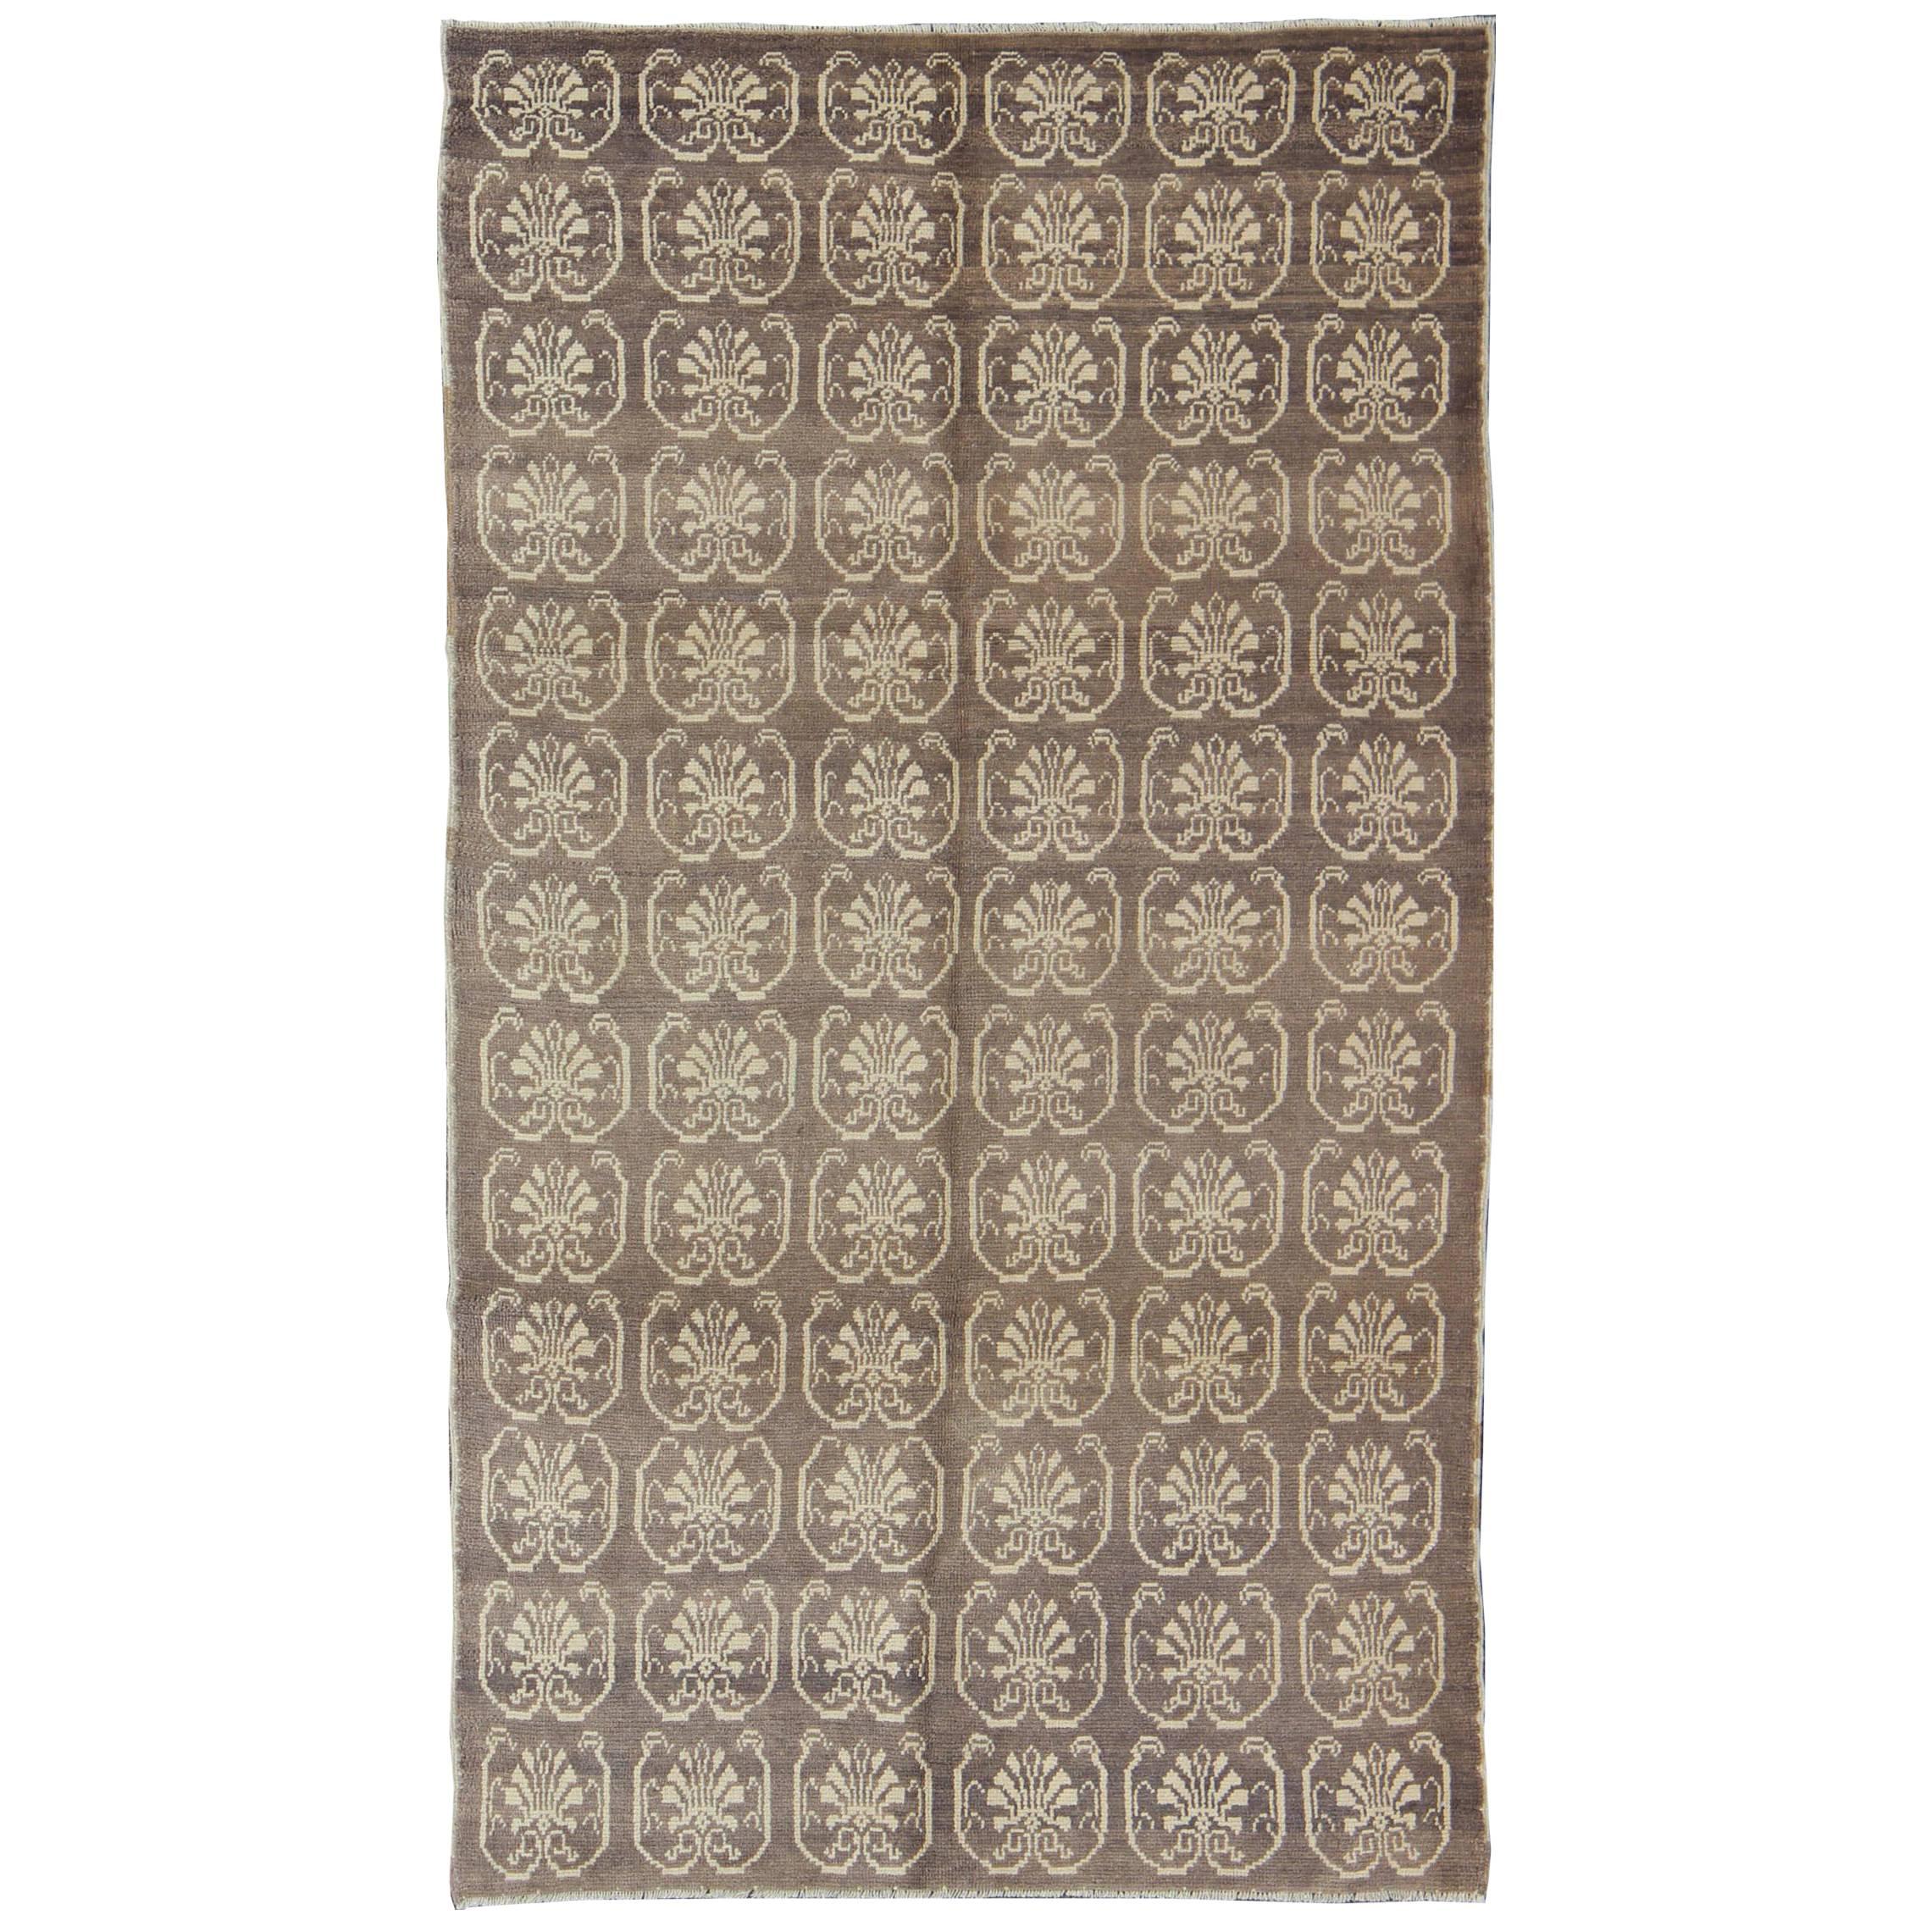 All-Over Design Vintage Turkish Tulu Carpet with Cream and Gray/Aubergine 